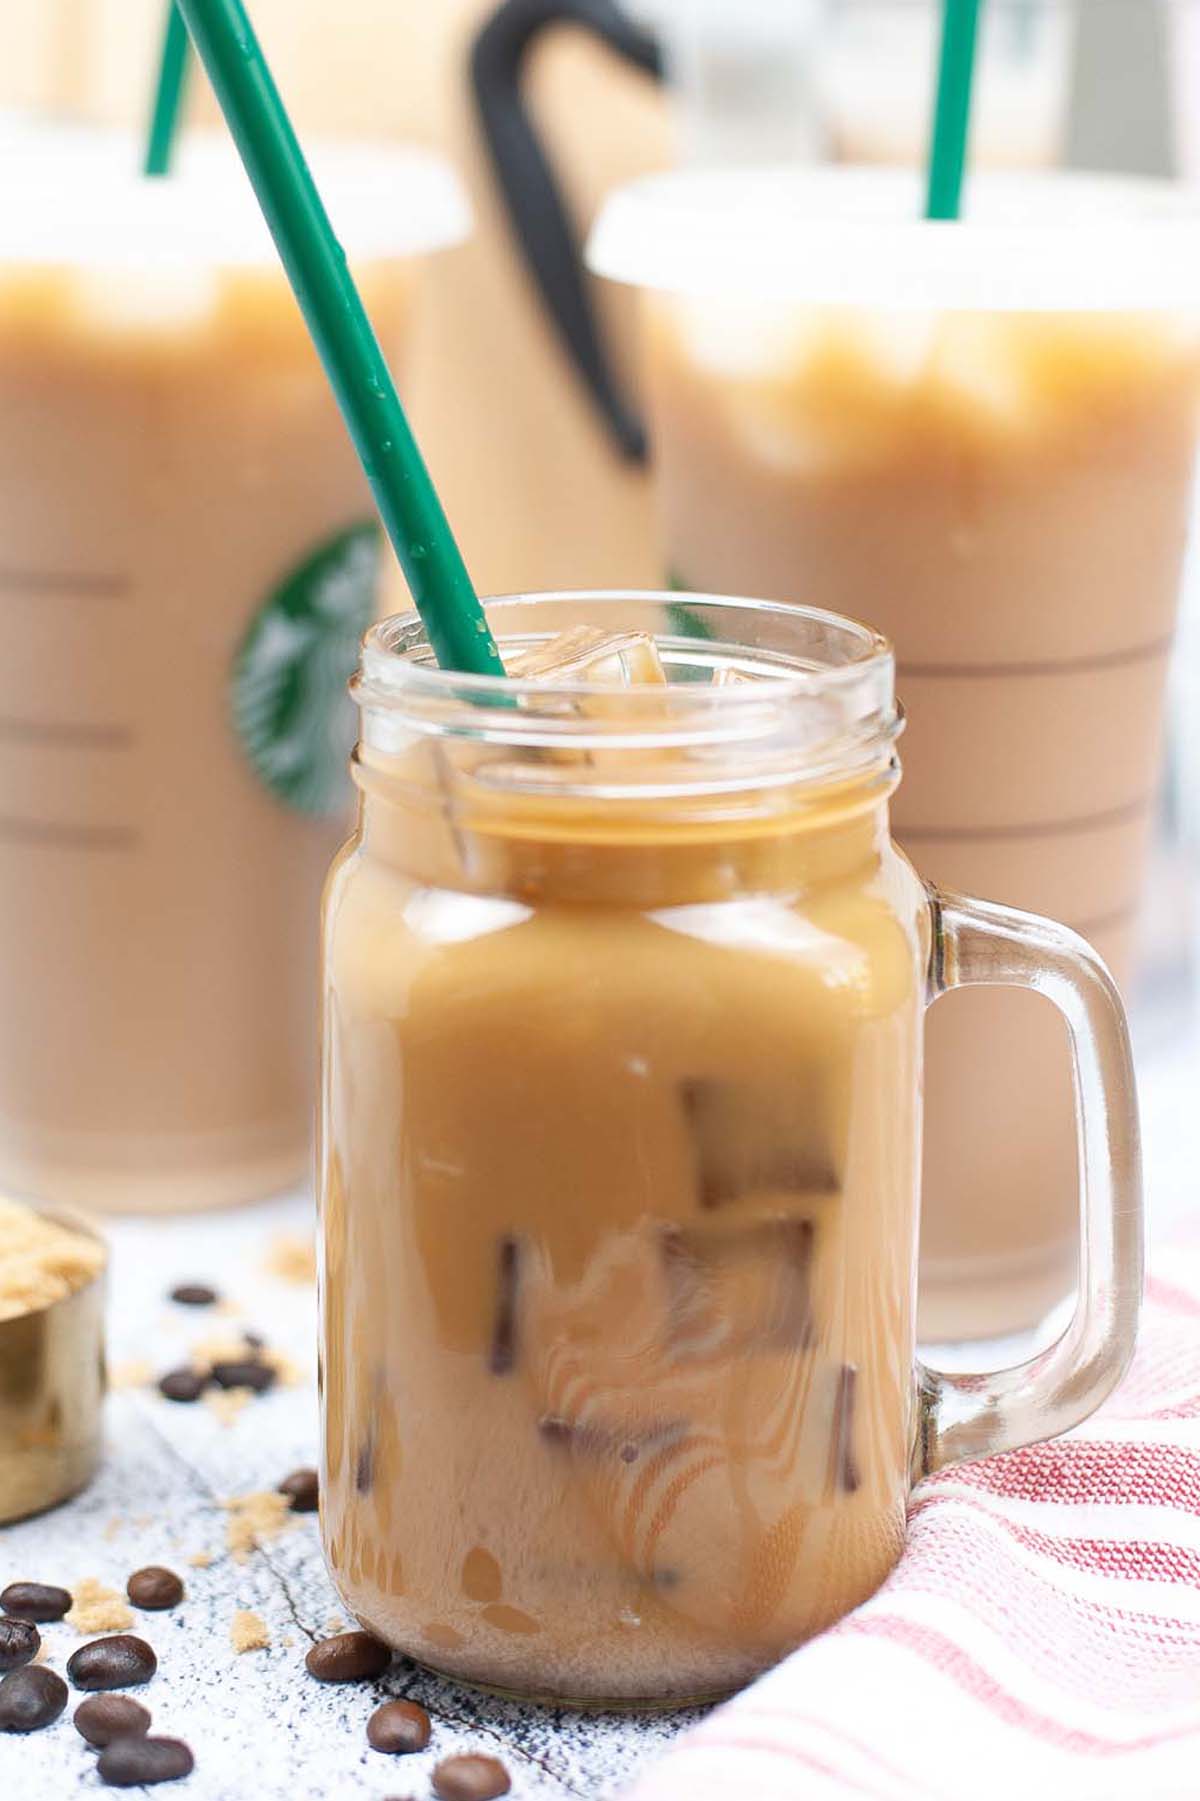 Iced coffee in a jar with a green straw.